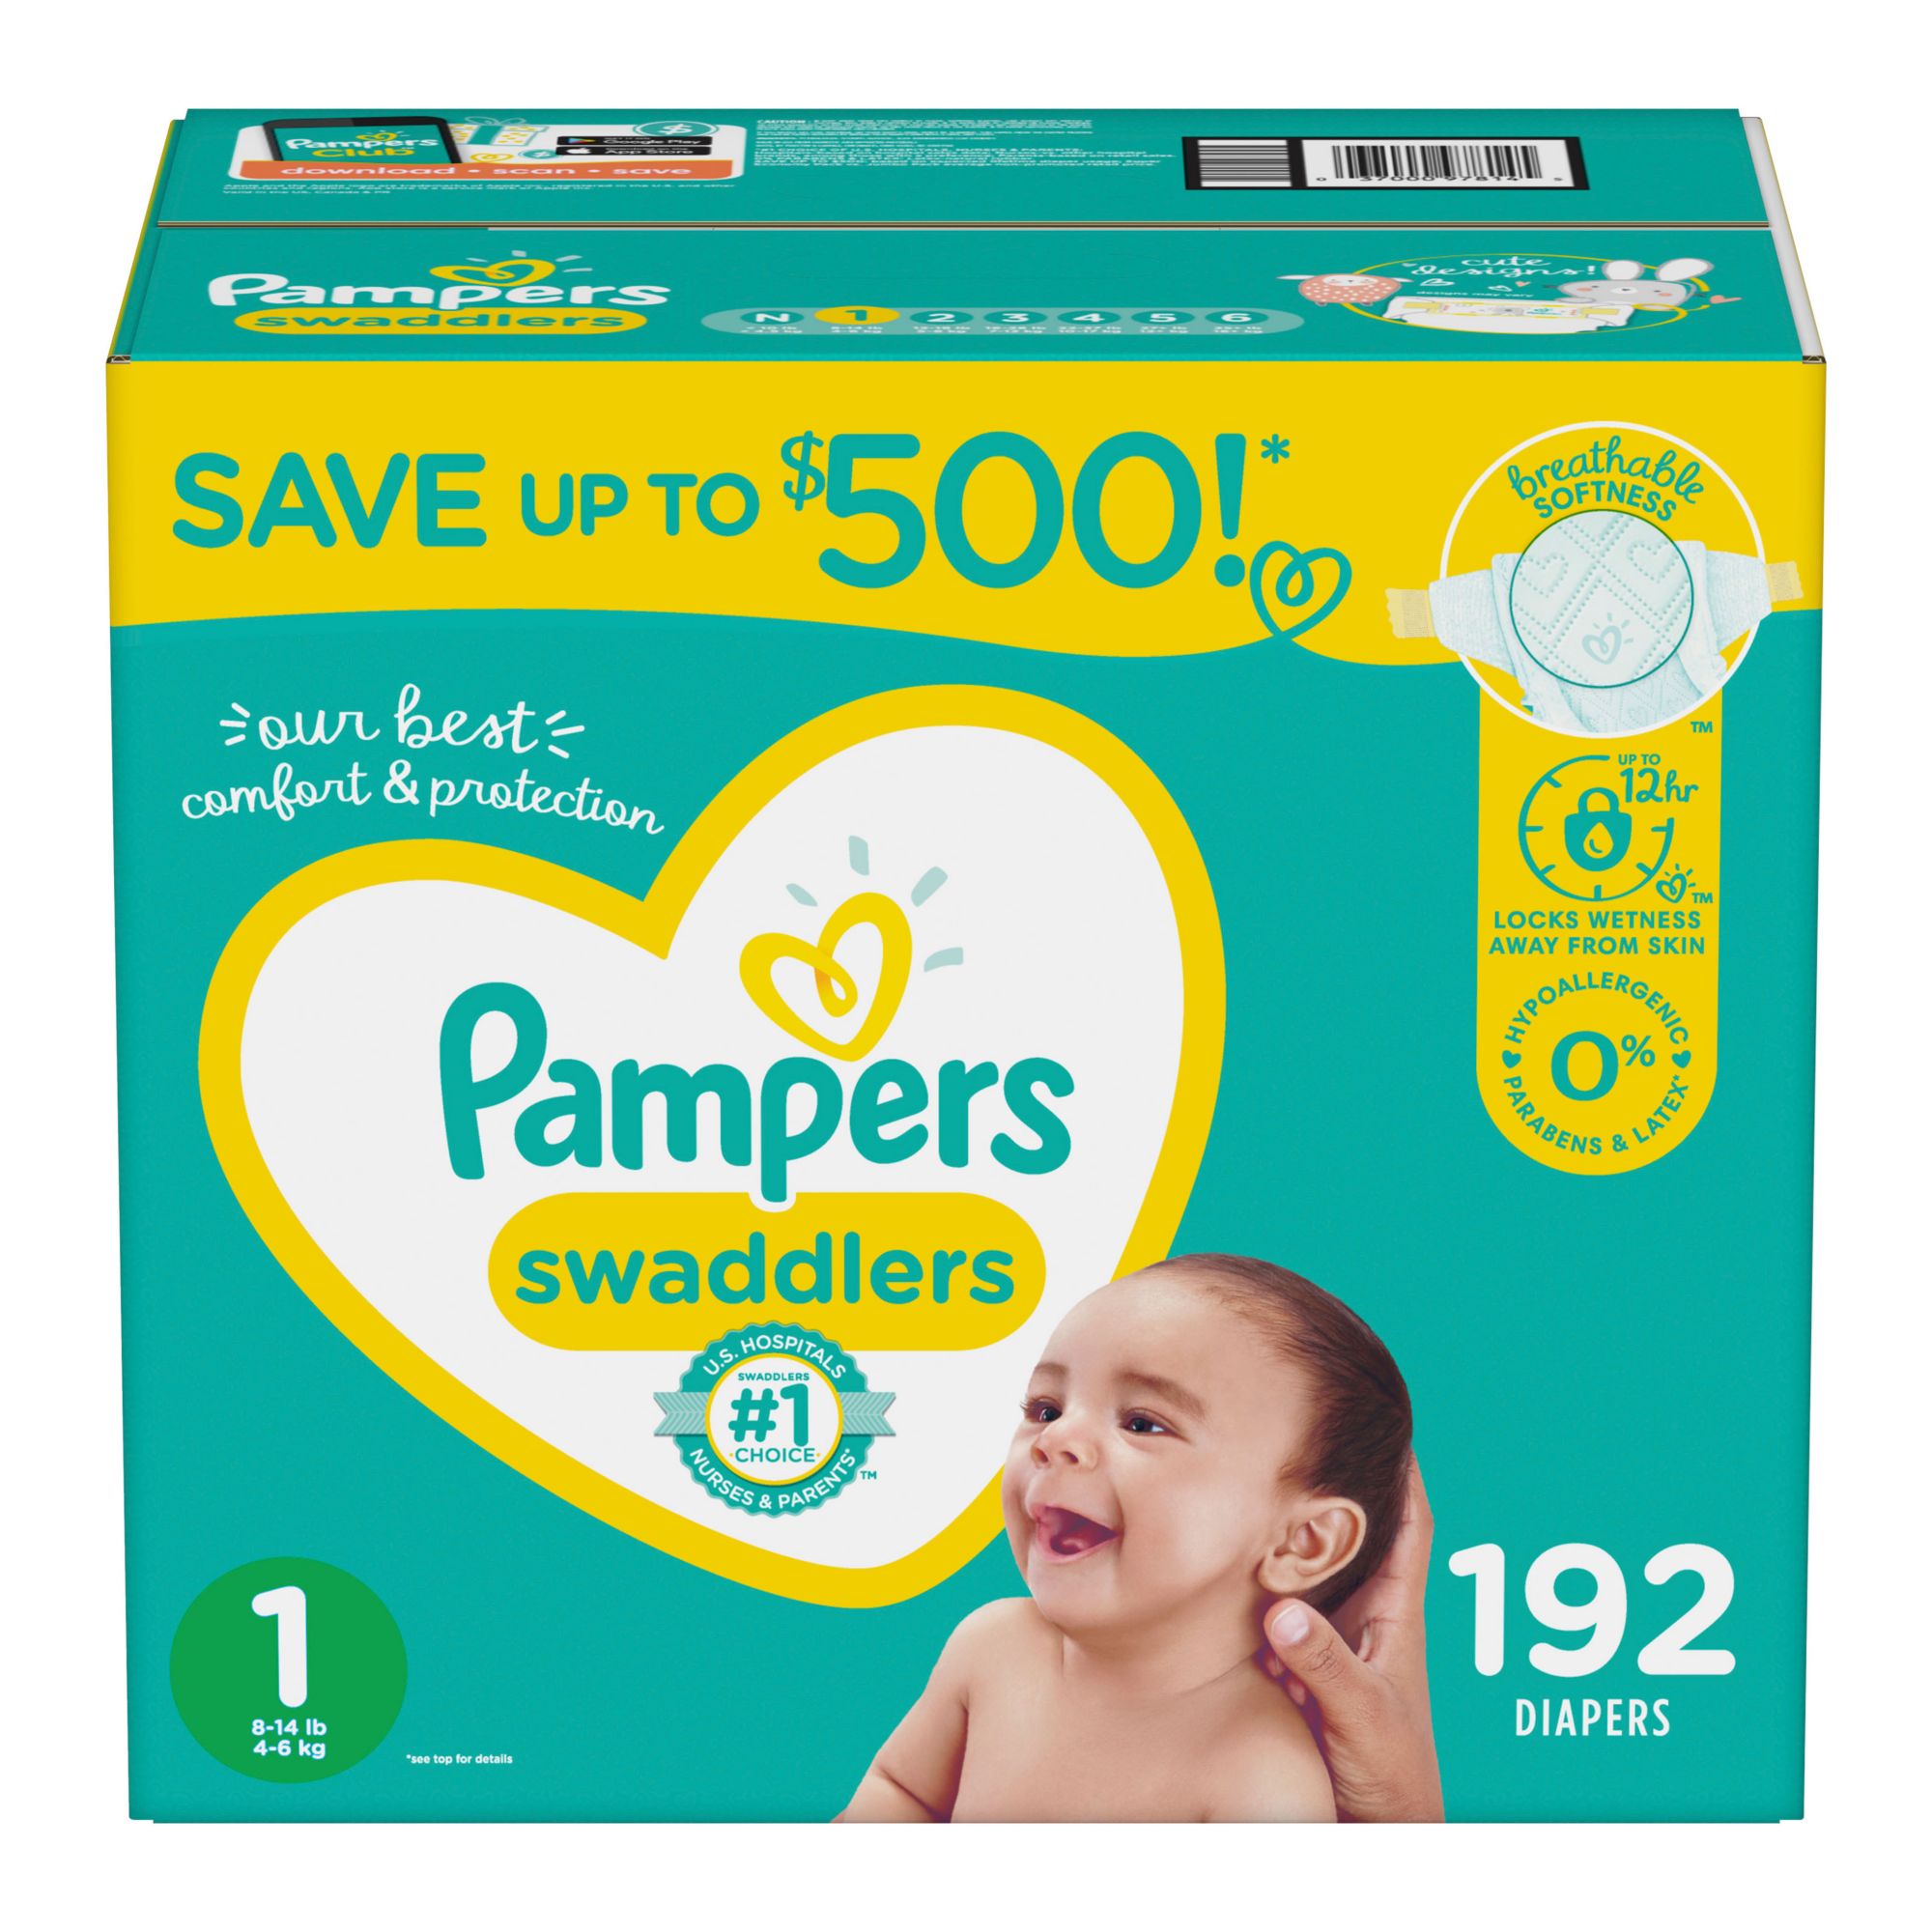 Pampers Swaddlers Diapers (Select Size)